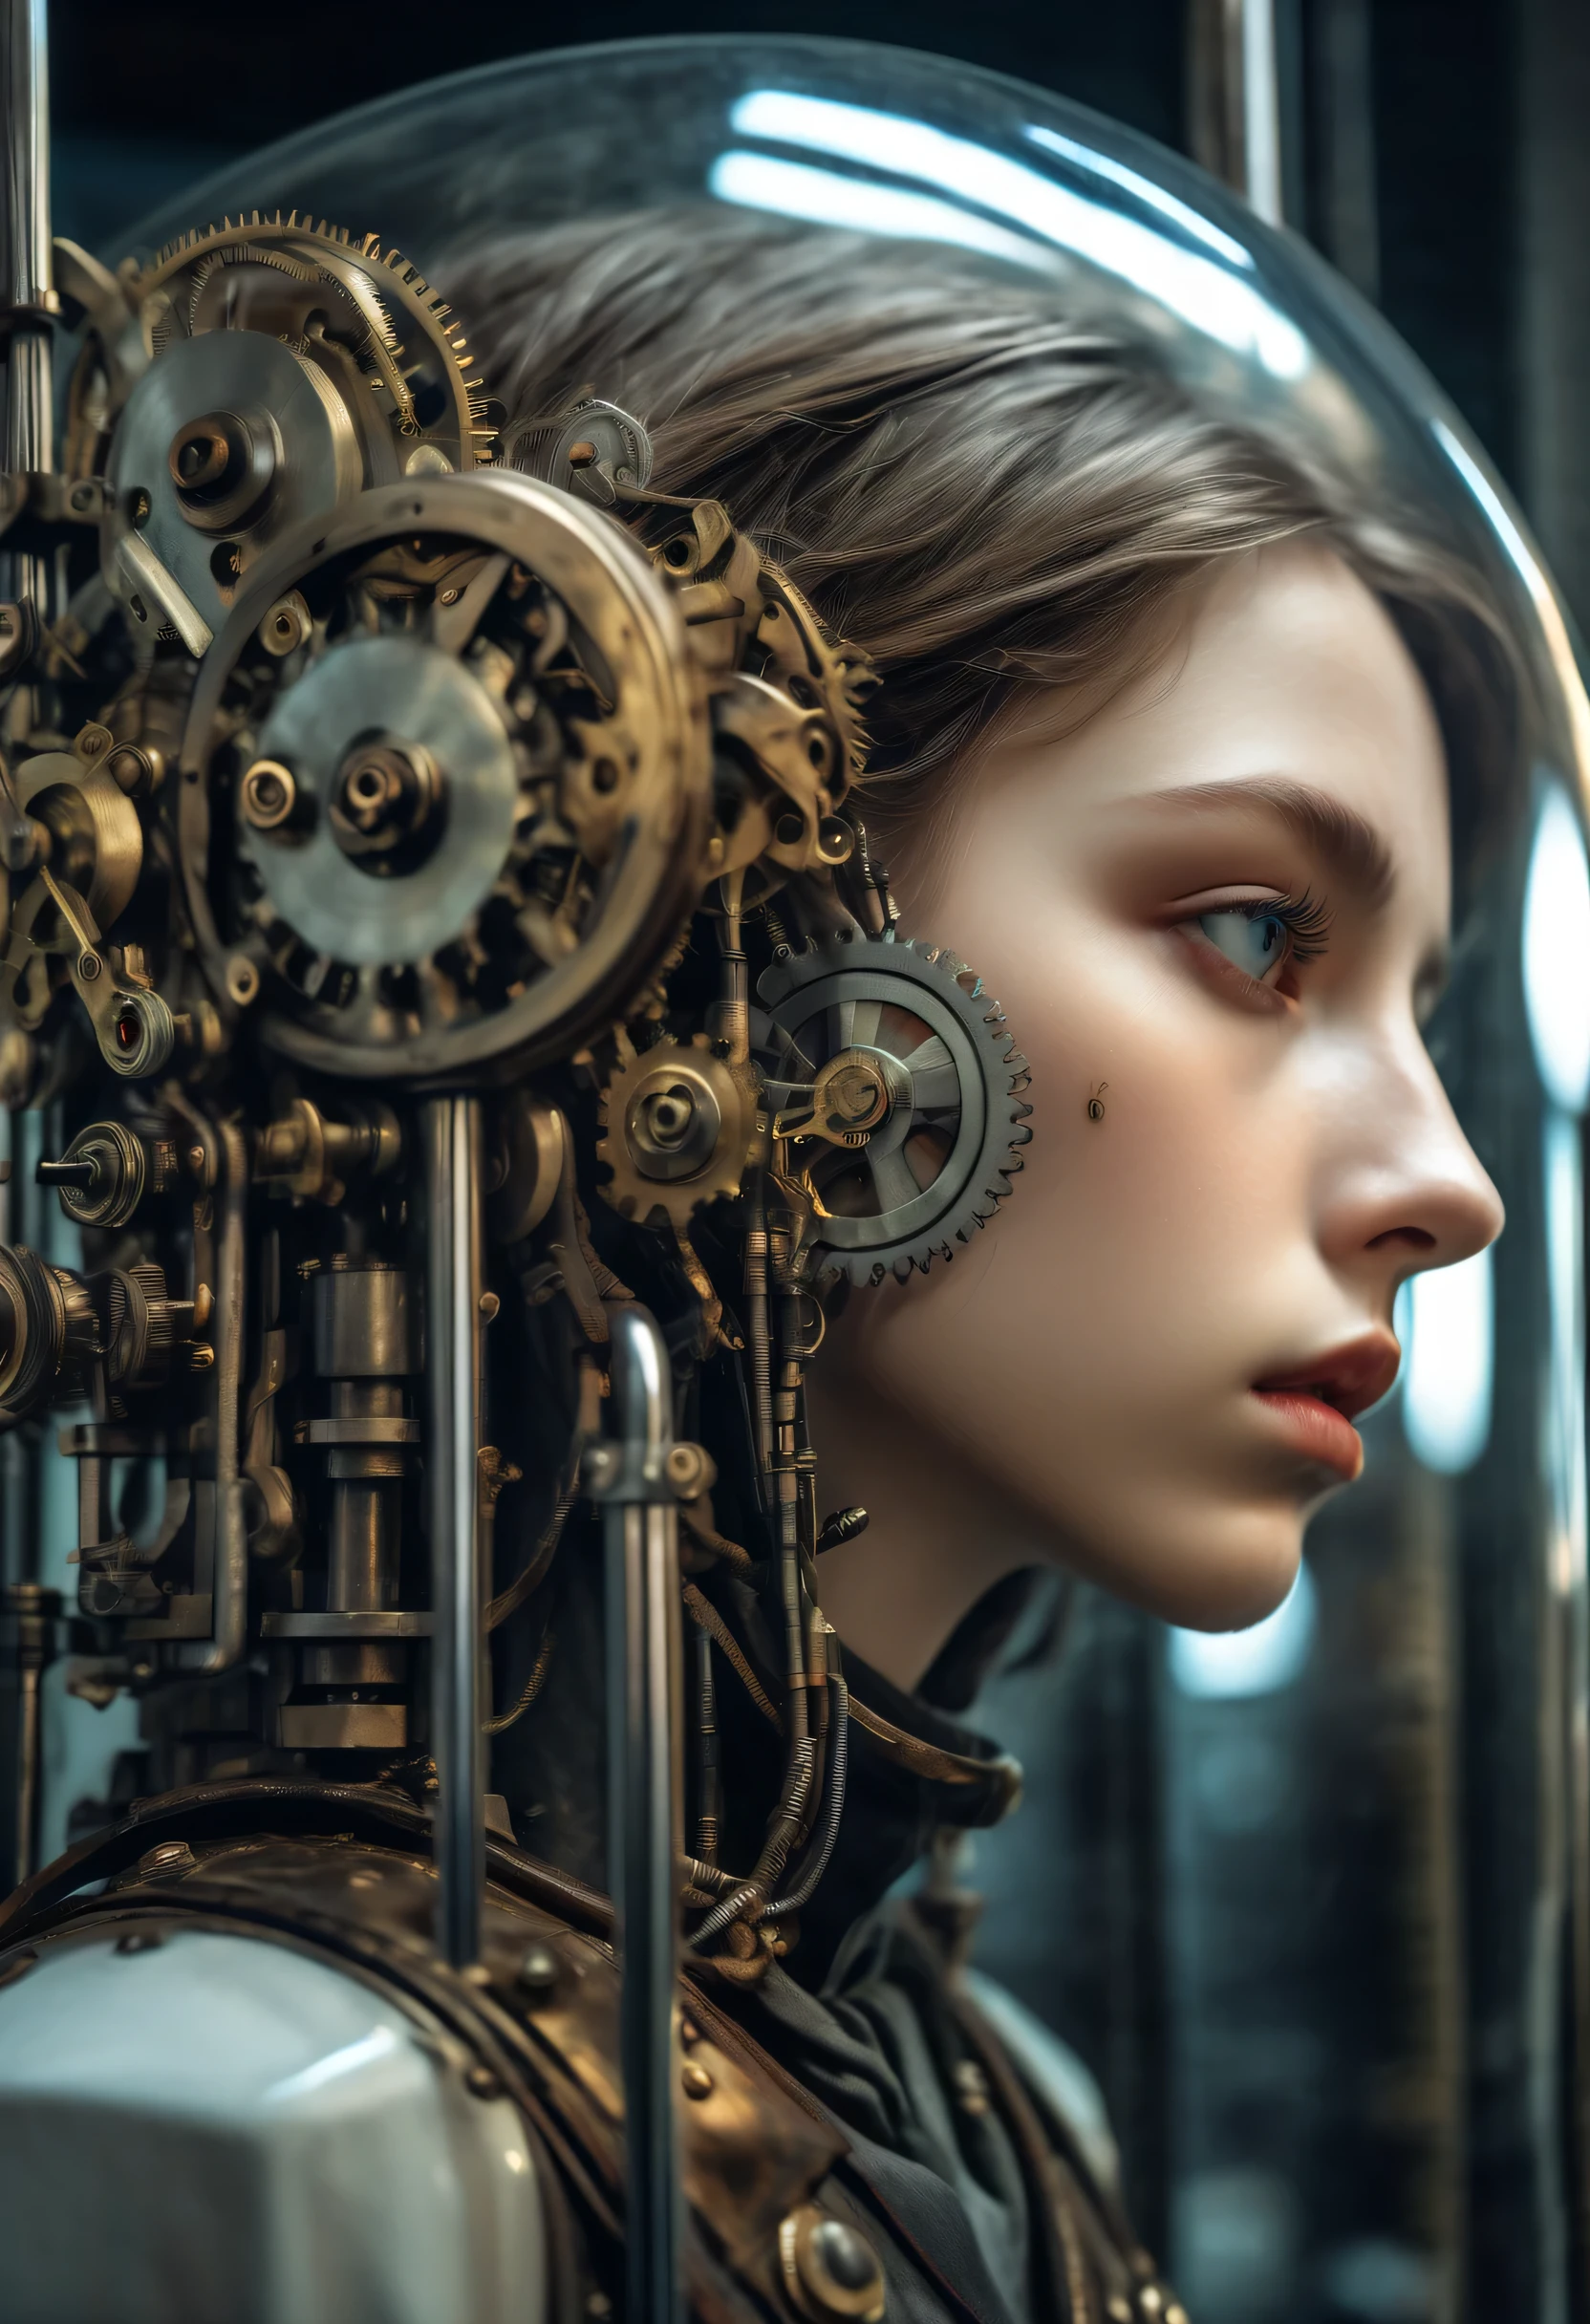 Clockpunk dark fantasy brush strokes, like a sad european young girl, Karakuri doll, A perfect porcelain machine stares solemnly, reflected in the mirror, Photorealistic rendering of impressive images, Skillfully drawn to evoke strong emotions, eyes express feelings of shame and regret, Incredibly clear and detailed, Instantly grab your audience&#39;s attention, Image quality is exceptional, Every feature is meticulously depicted., Make the scene feel almost concrete.